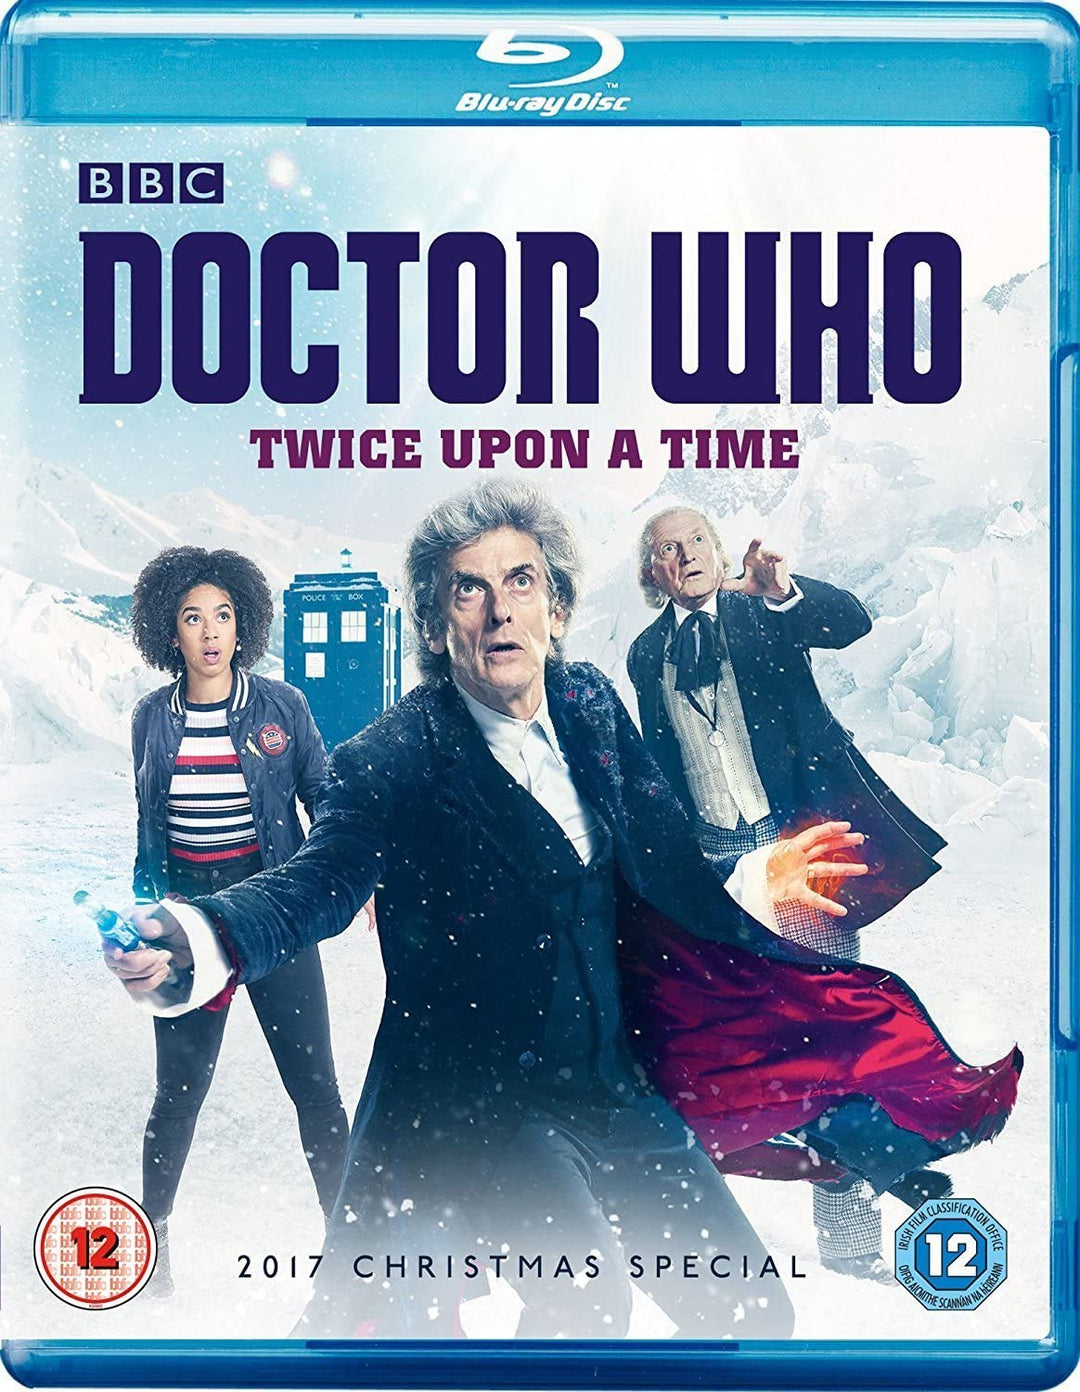 Doctor Who Christmas Special 2017 - Twice Upon A Time - Sci-fi [Blu-Ray]